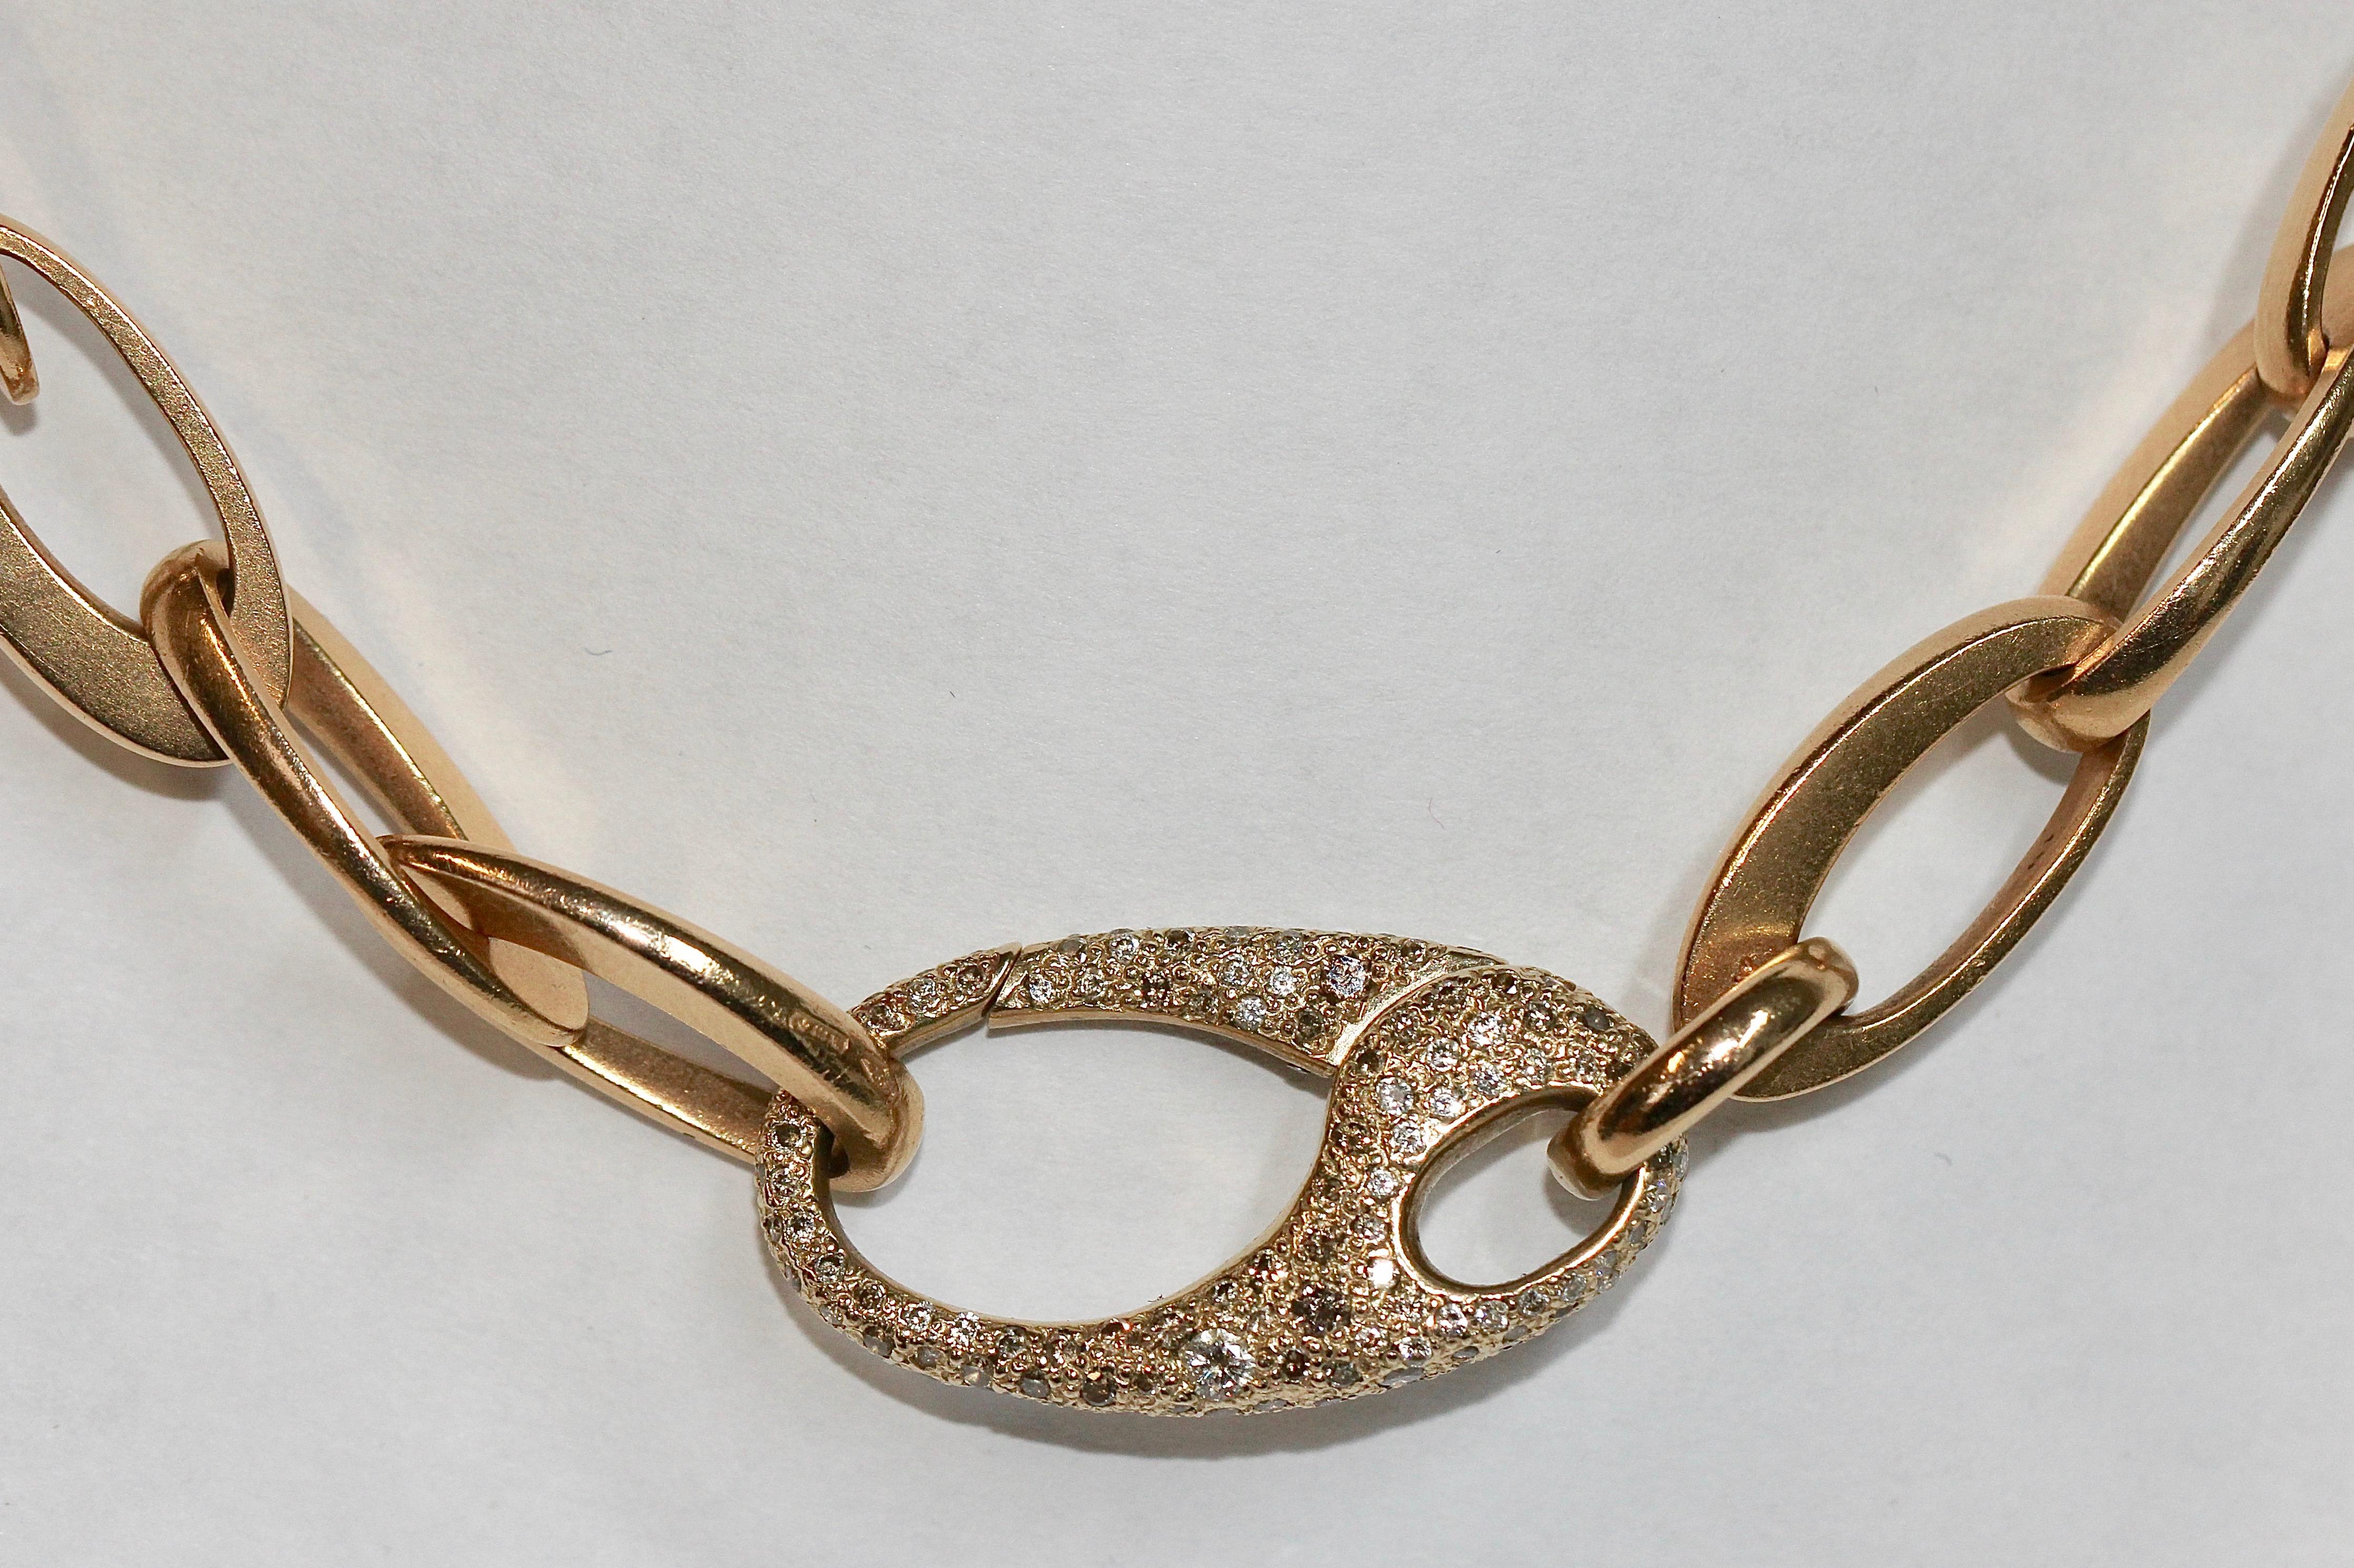 Modern Beautiful Designer Chain Necklace from Pomellato, 18k Rose Gold with Diamonds